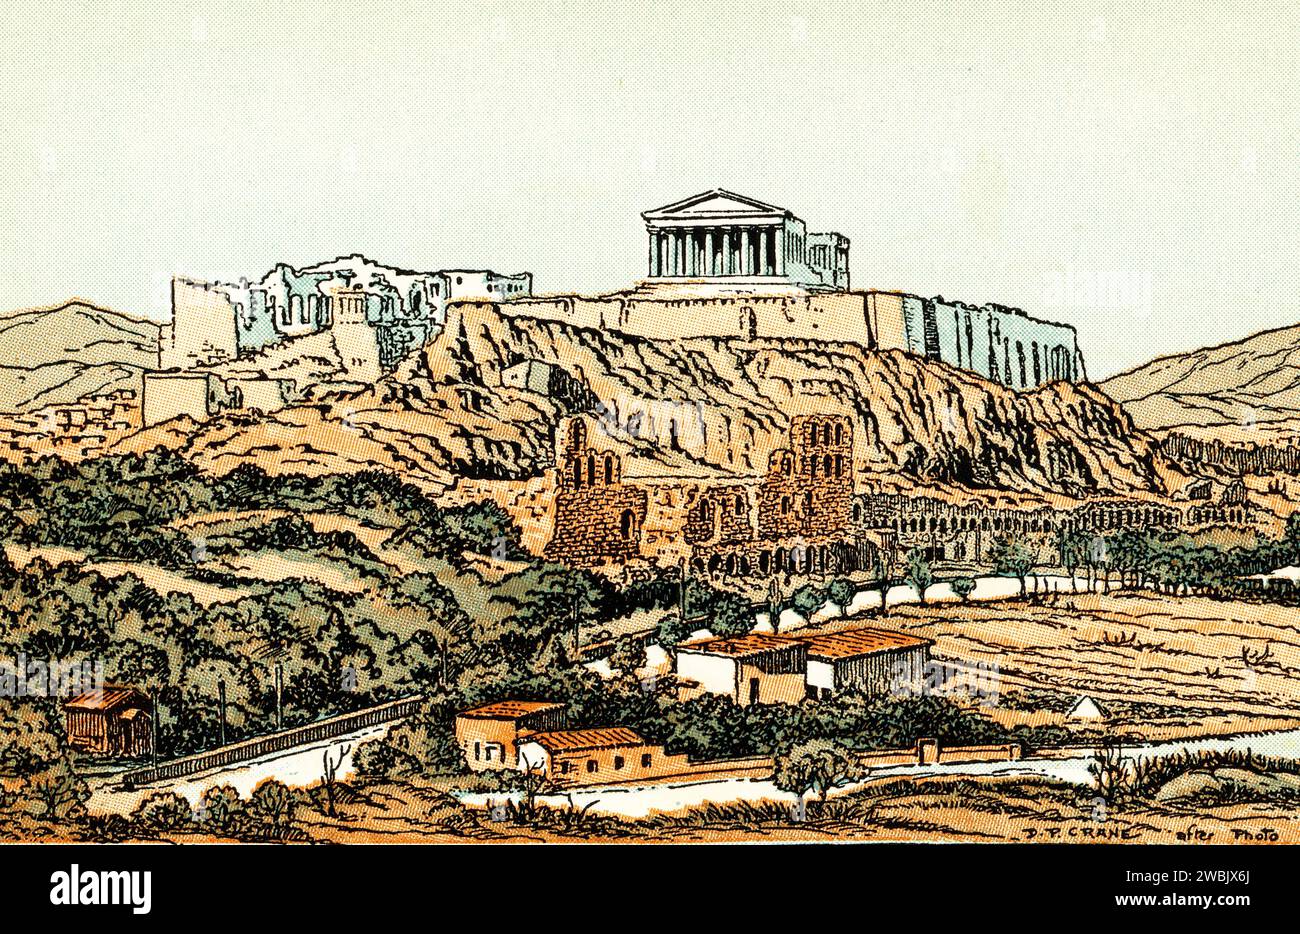 The Acropolis of Athens, c1930. By Donn Philip Crane (1878-1944). The Acropolis of Athens is an ancient citadel located above the city of Athens, Greece. While there is evidence that the hill was inhabited as early as the fourth millennium BC, it was Pericles (c495-429 BC) in the fifth century BC who coordinated the construction of the buildings whose present remains are the site's most important ones, including the Parthenon, the Propylaea, the Erechtheion and the Temple of Athena Nike. Stock Photo